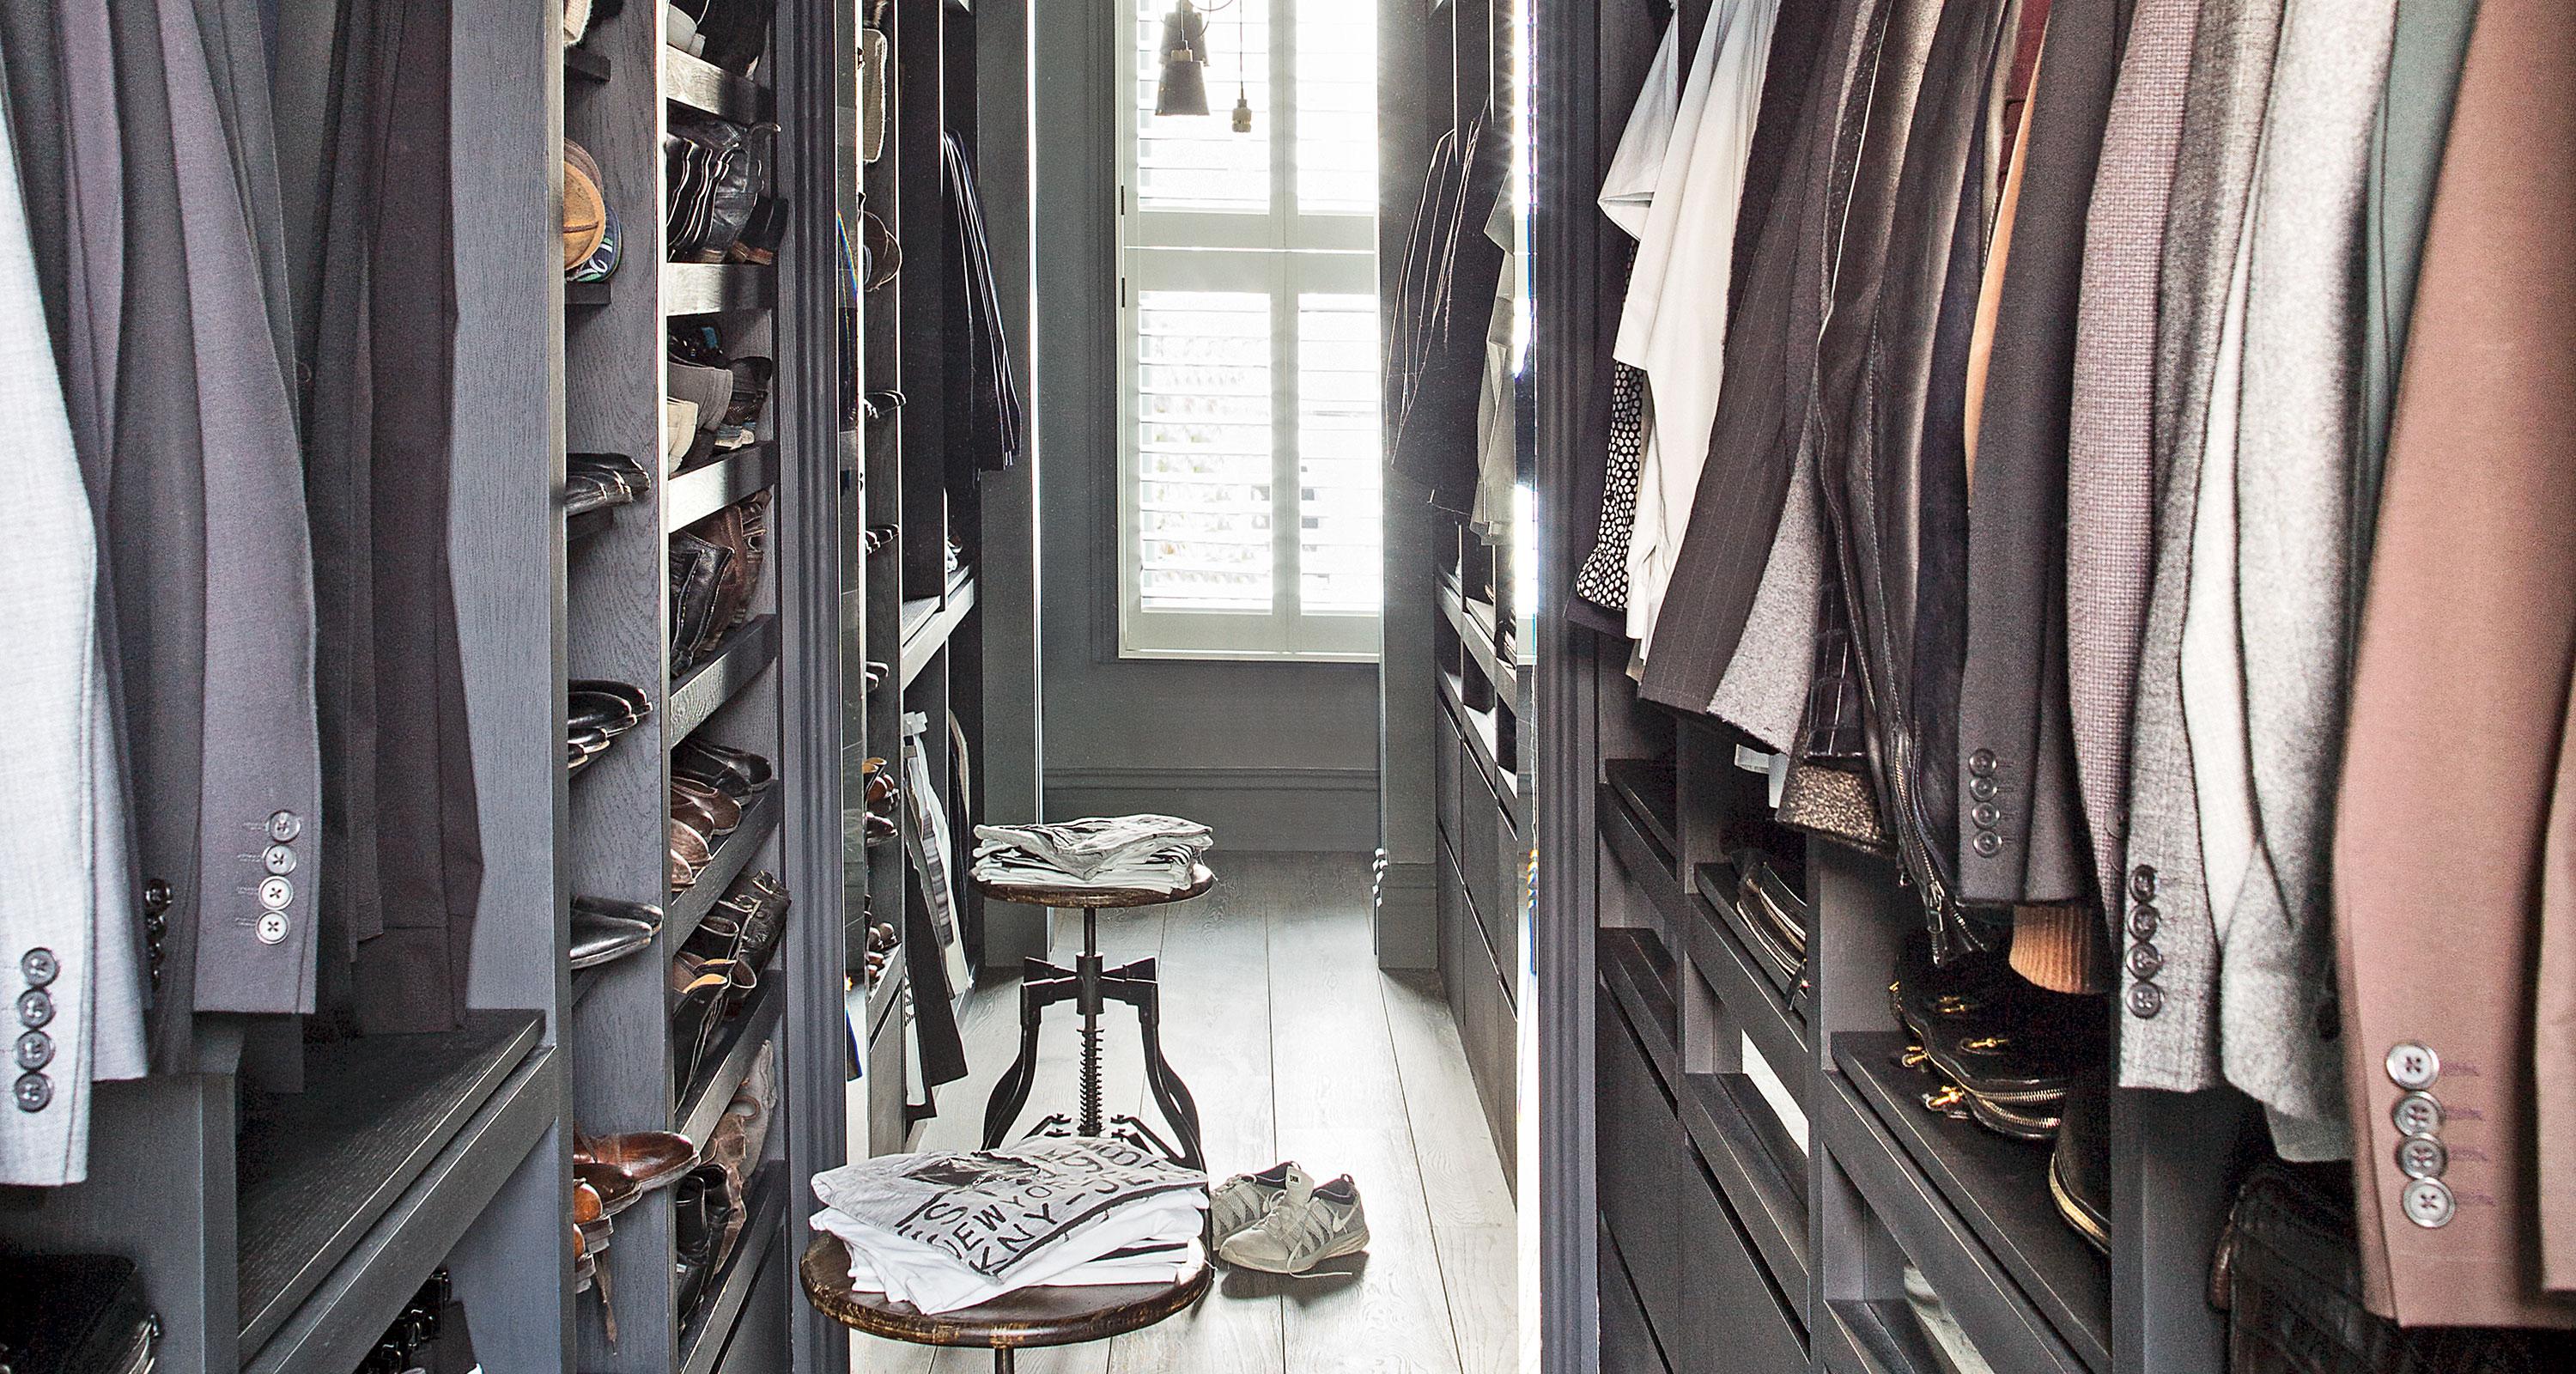 7 Tips on Revamping Your Wardrobe by Spending as Little as Possible